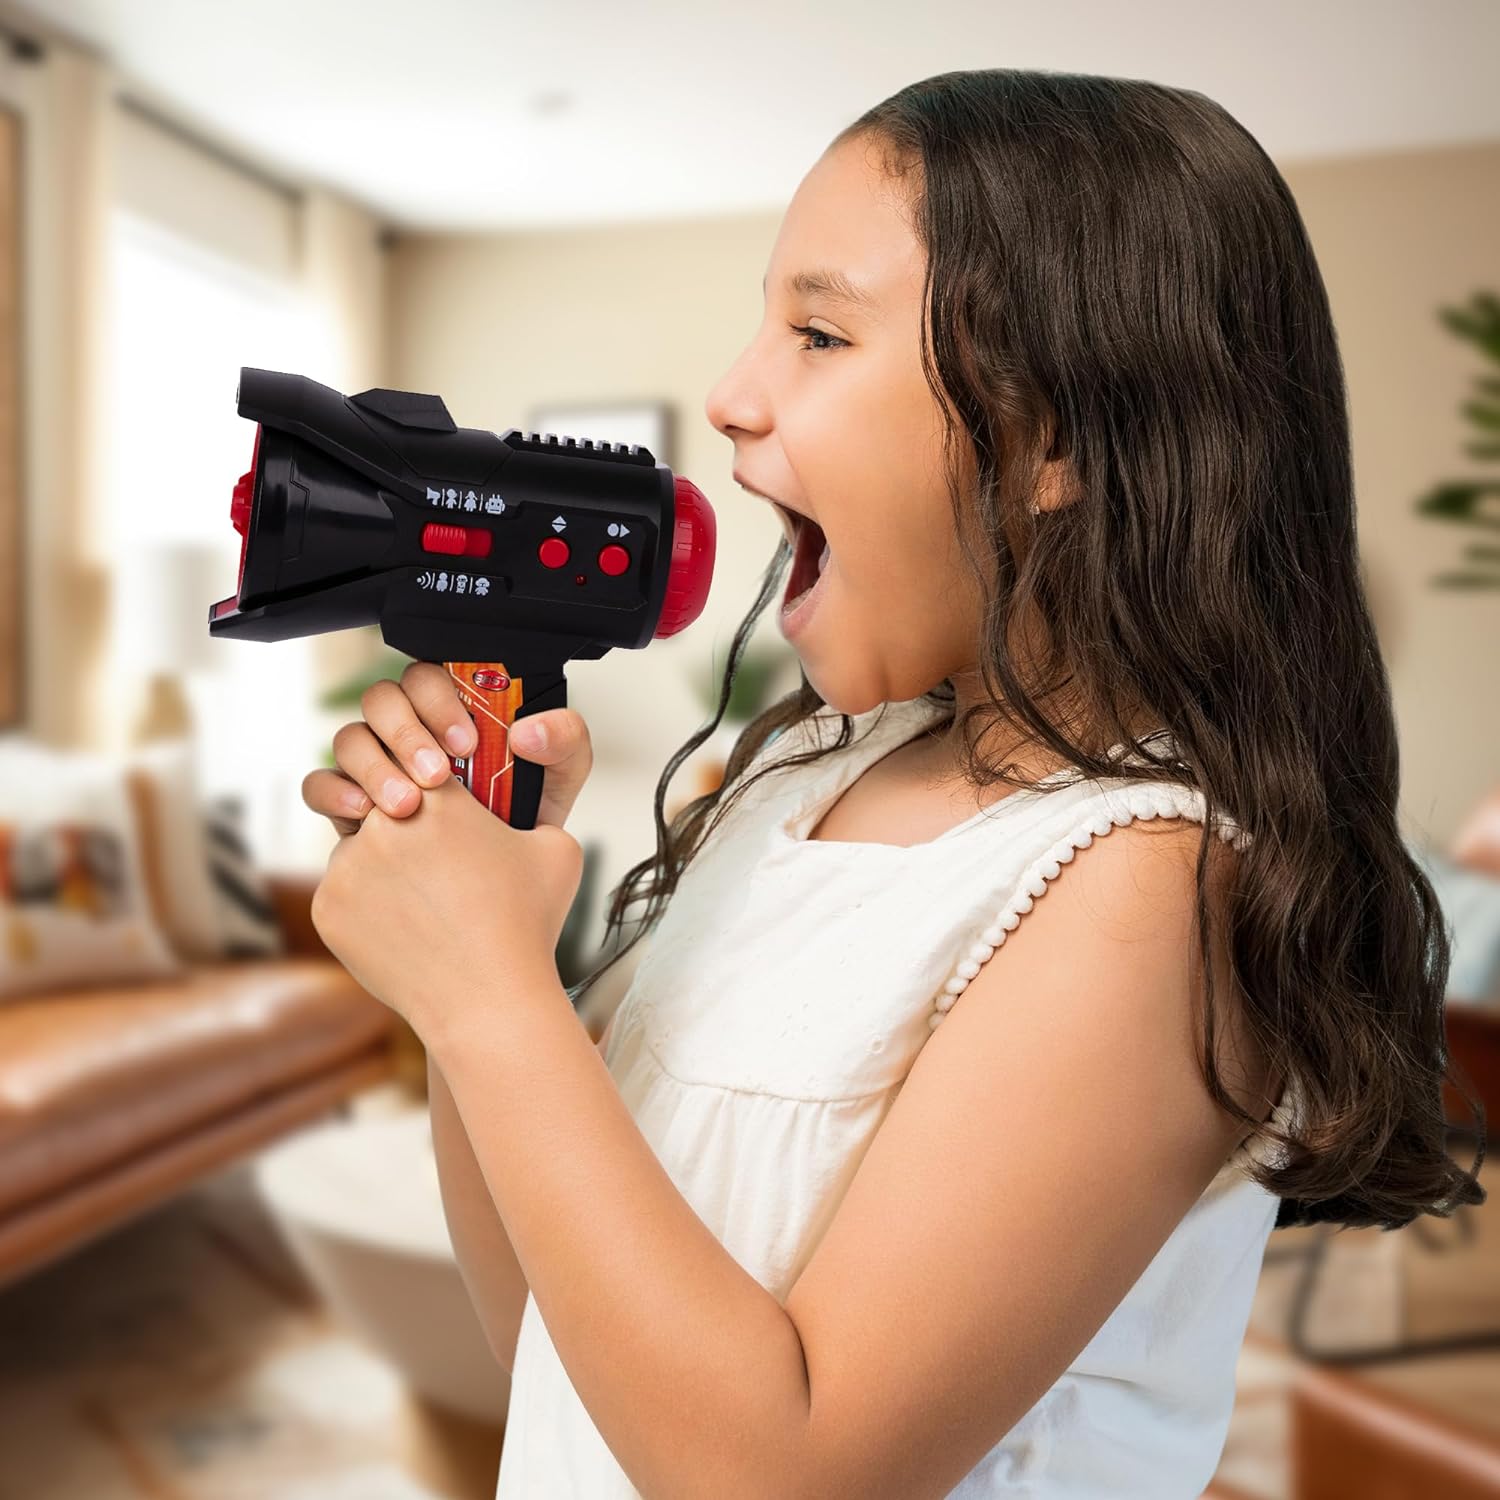 ArtCreativity 3 in 1 Voice Changer for Kids - Megaphone, Recorder, and Voice Changer Device - Toy Megaphone Speaker with 8 Different Voices and Batteries - Voice Changer Megaphone for Pranks